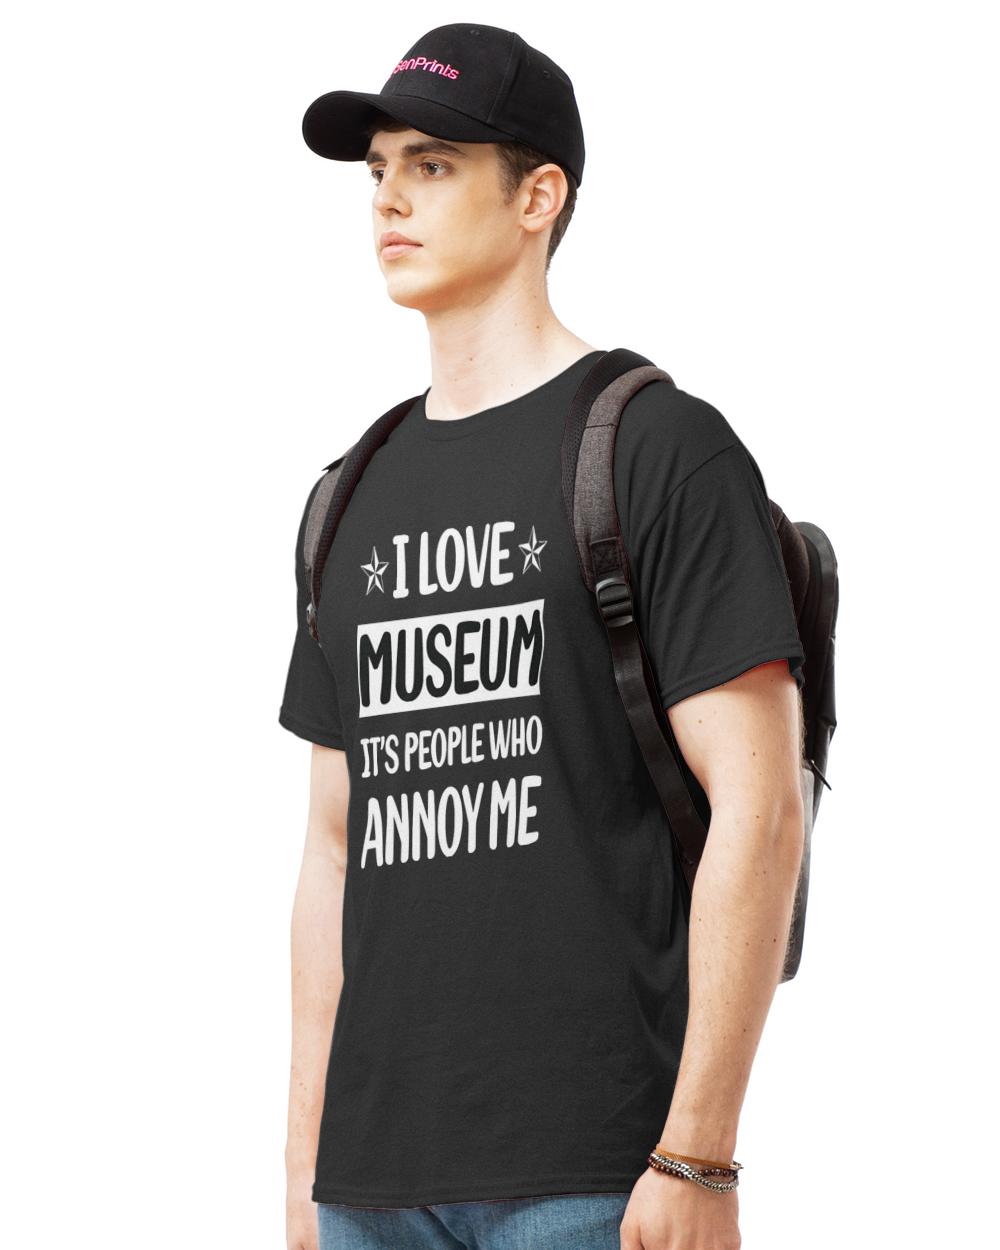 Museum T- Shirt Funny People Annoy Me Museum